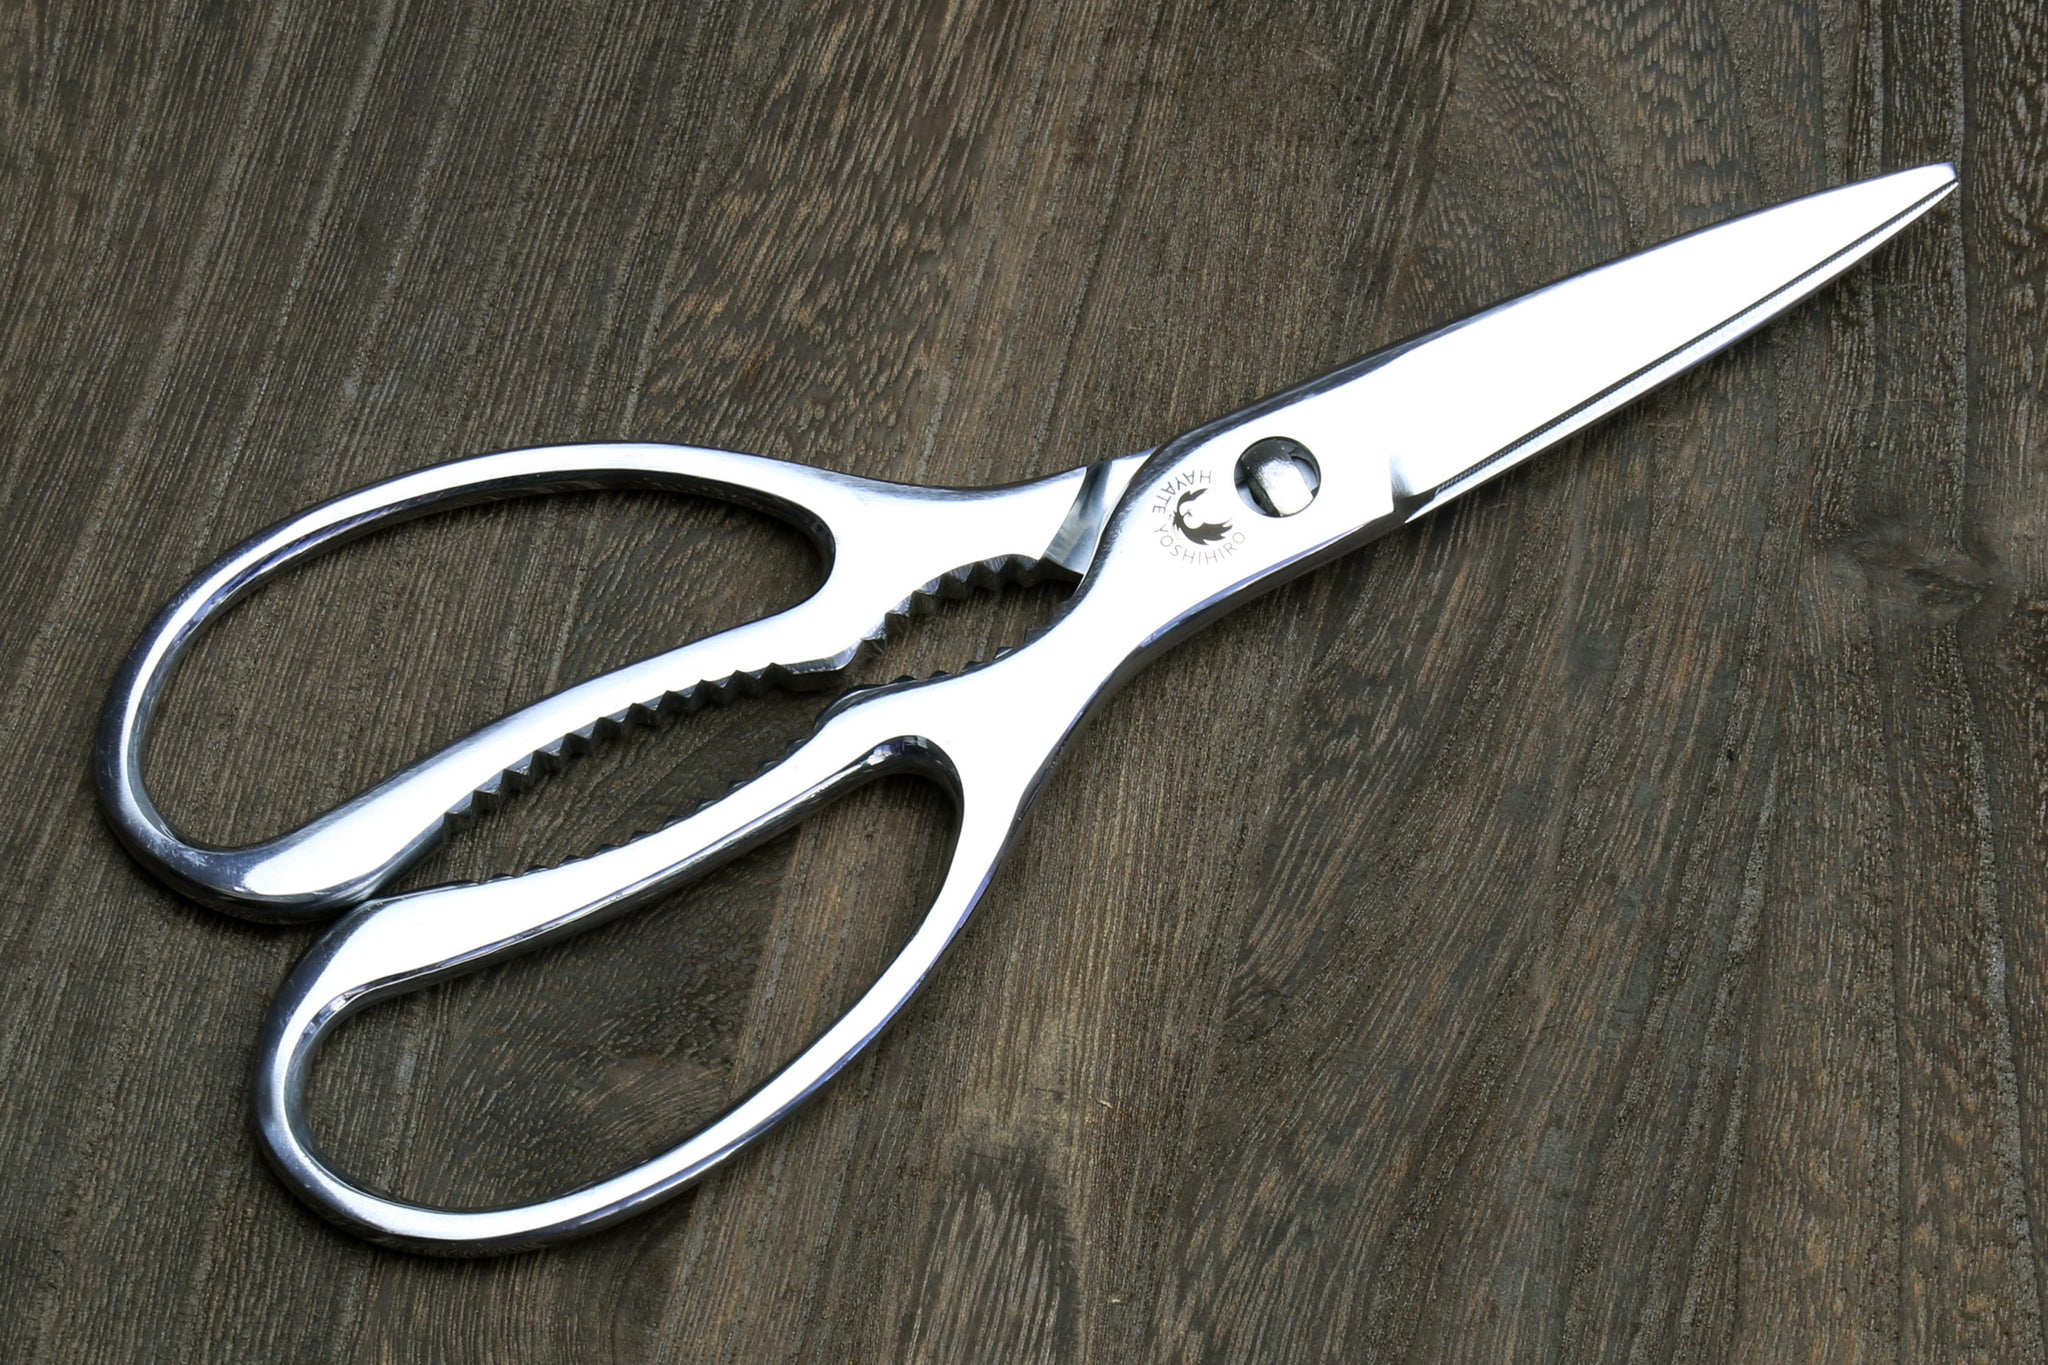 Stainless Steel Japanese Kitchen Scissors [Strong-Pro]